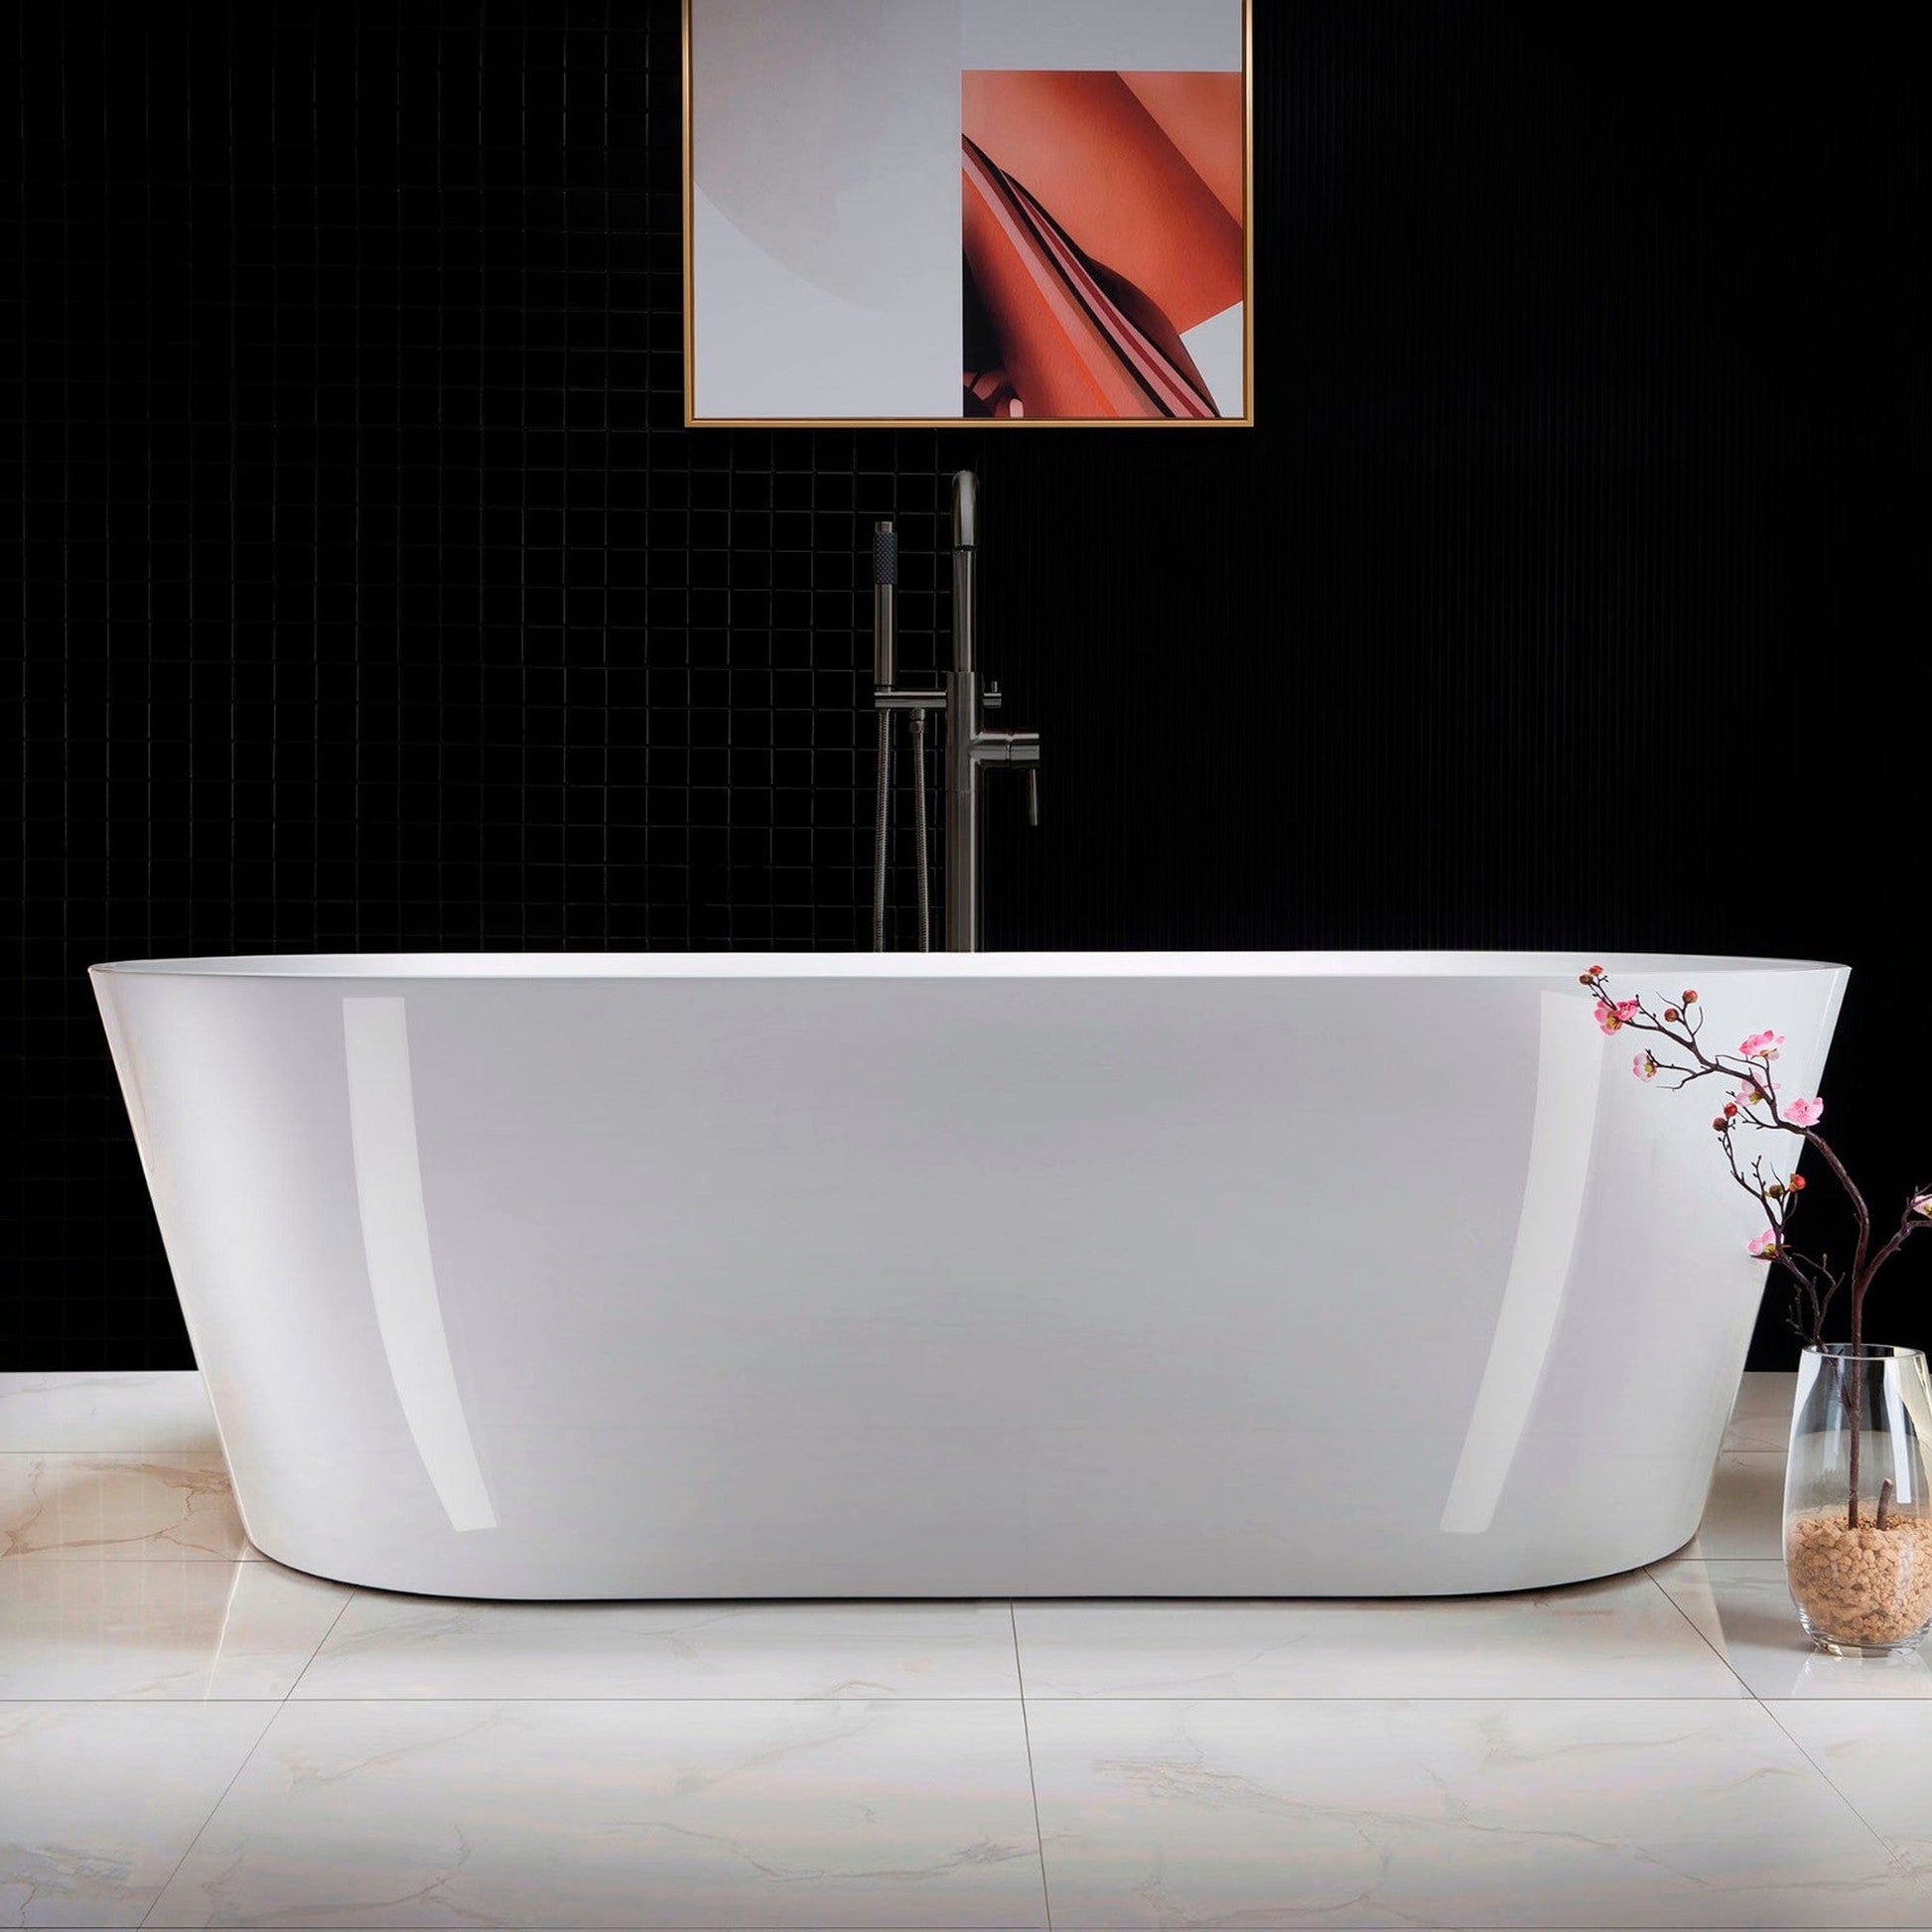 WoodBridge 71" White Acrylic Freestanding Contemporary Soaking Bathtub With Matte Black Drain, Overflow, F0006MBRD Tub Filler and Caddy Tray